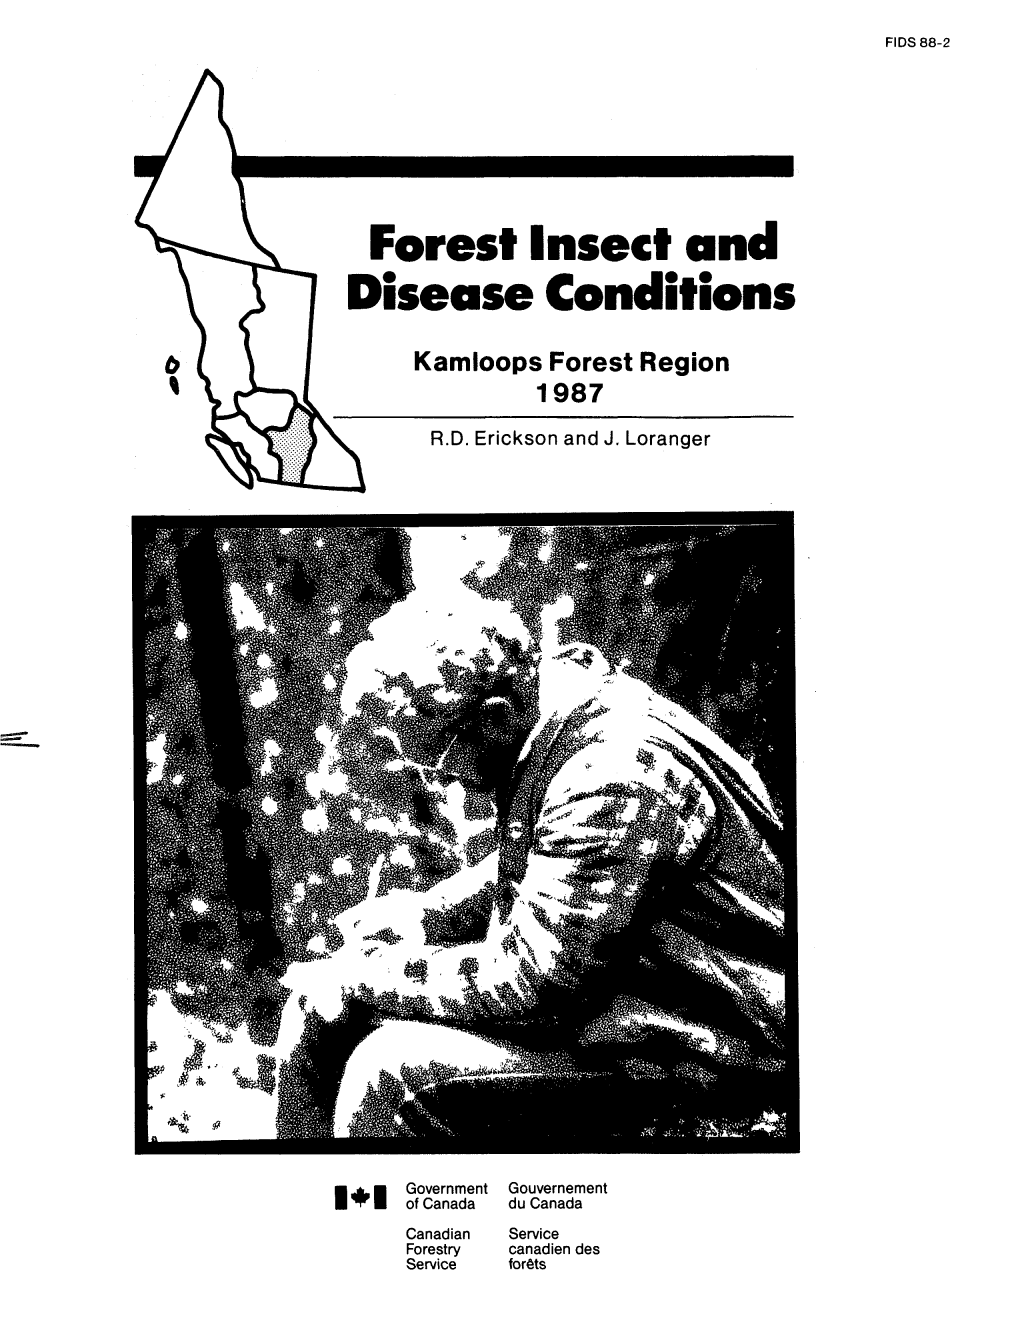 Forest Insect and Disease Conditions